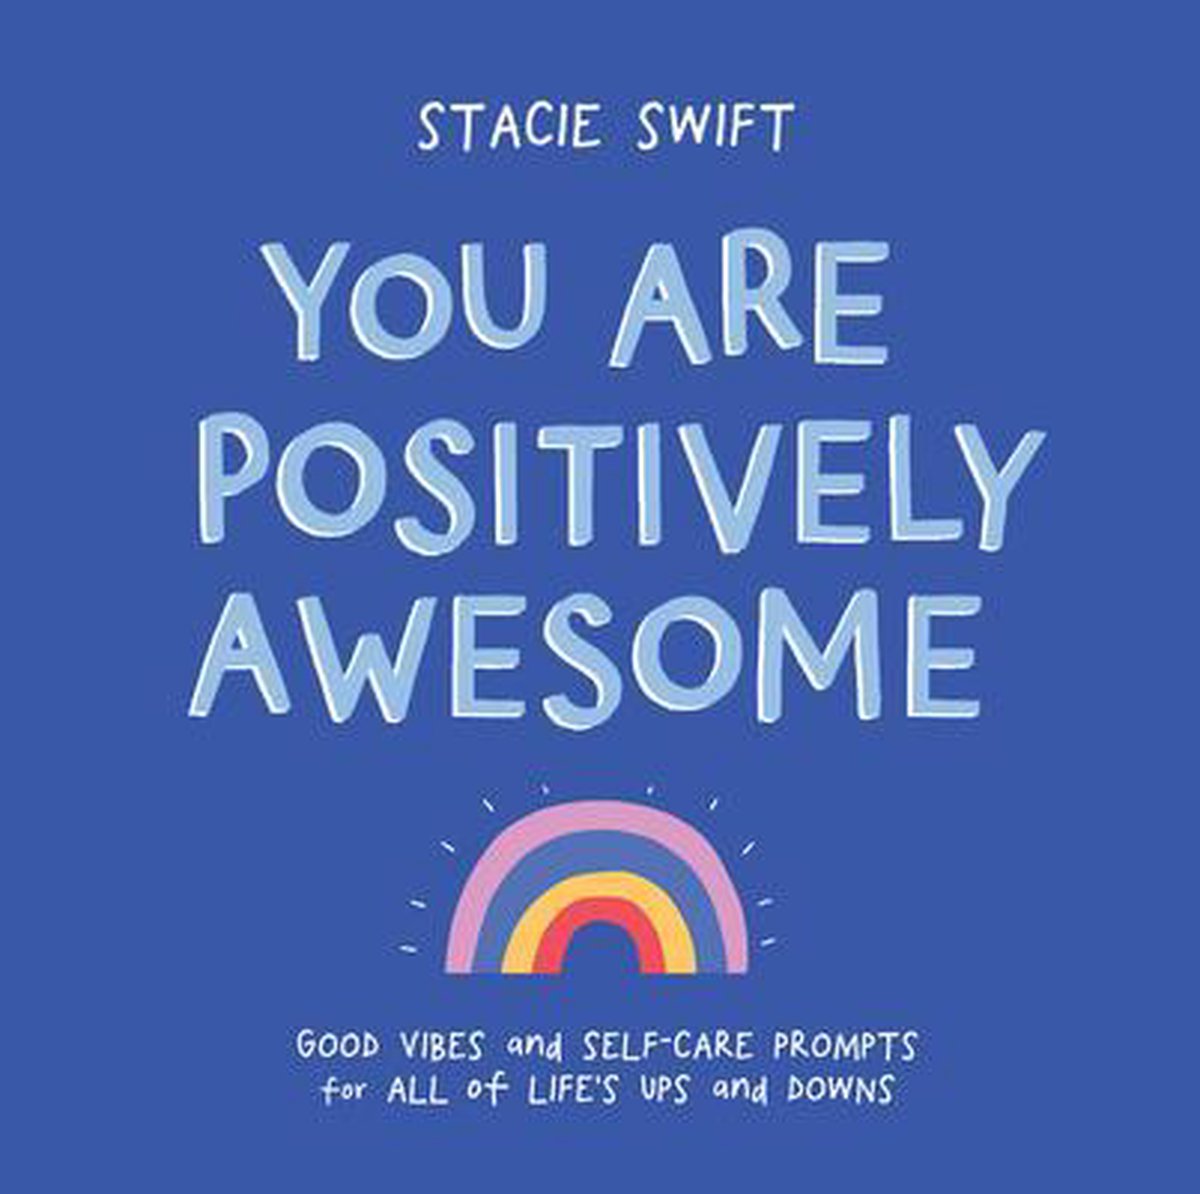 You Are Positively Awesome - Stacie Swift